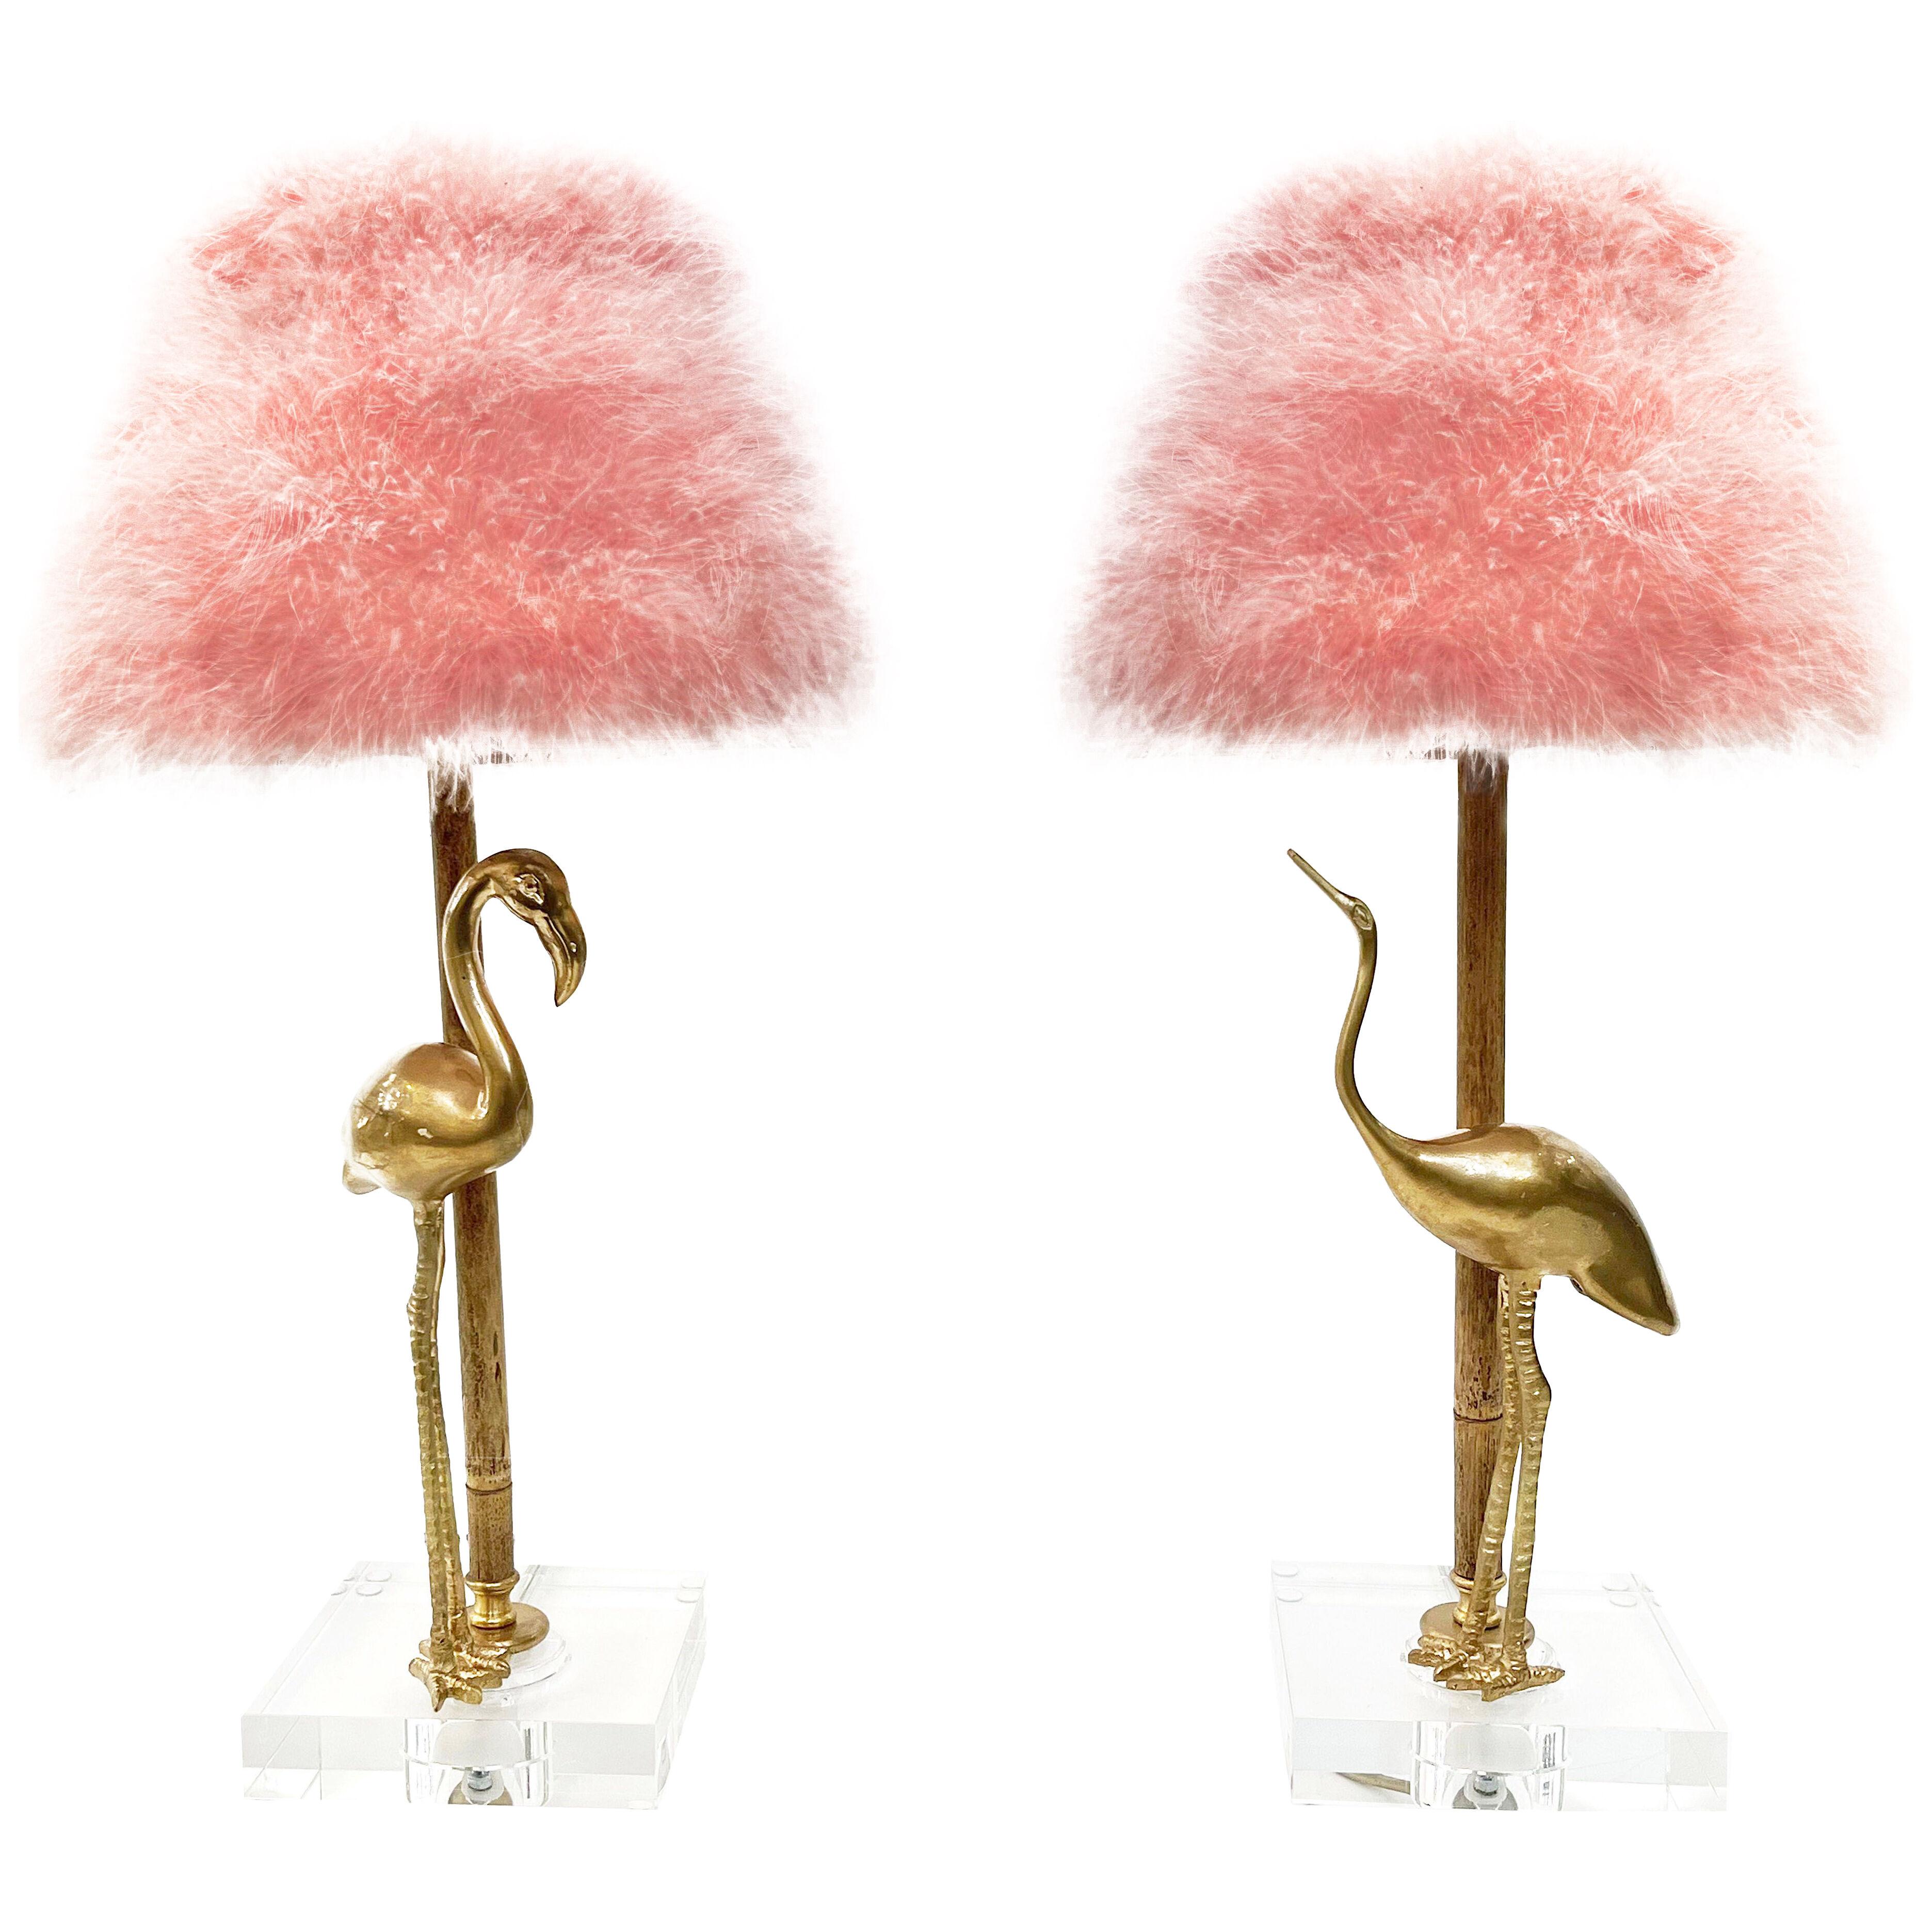 1970 Italian Vintage Pair of Brass Lucite Bamboo Table Lamps & Pink Fur Shades